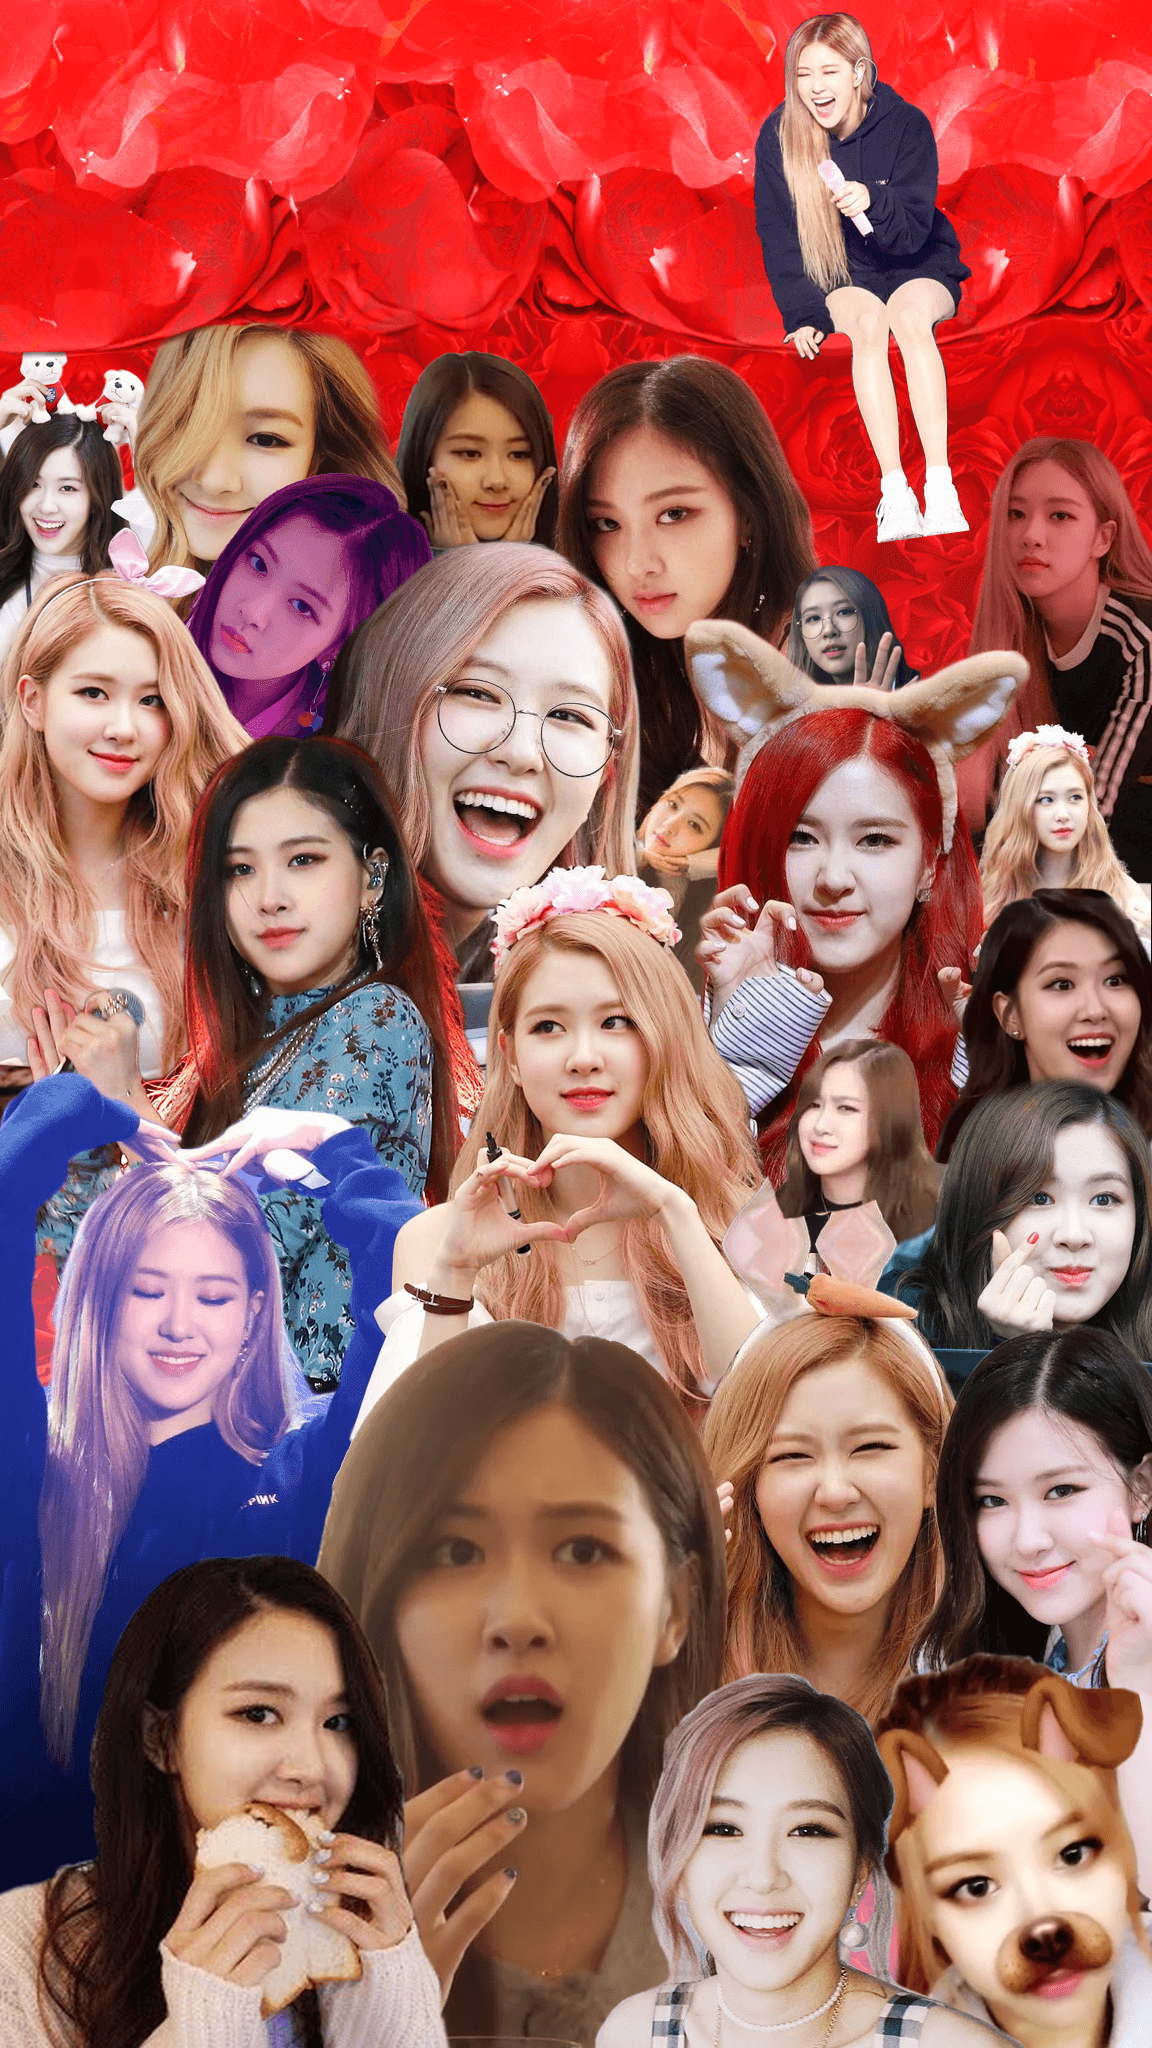 I made a few BLACKPINK phone wallpaper, take your pick